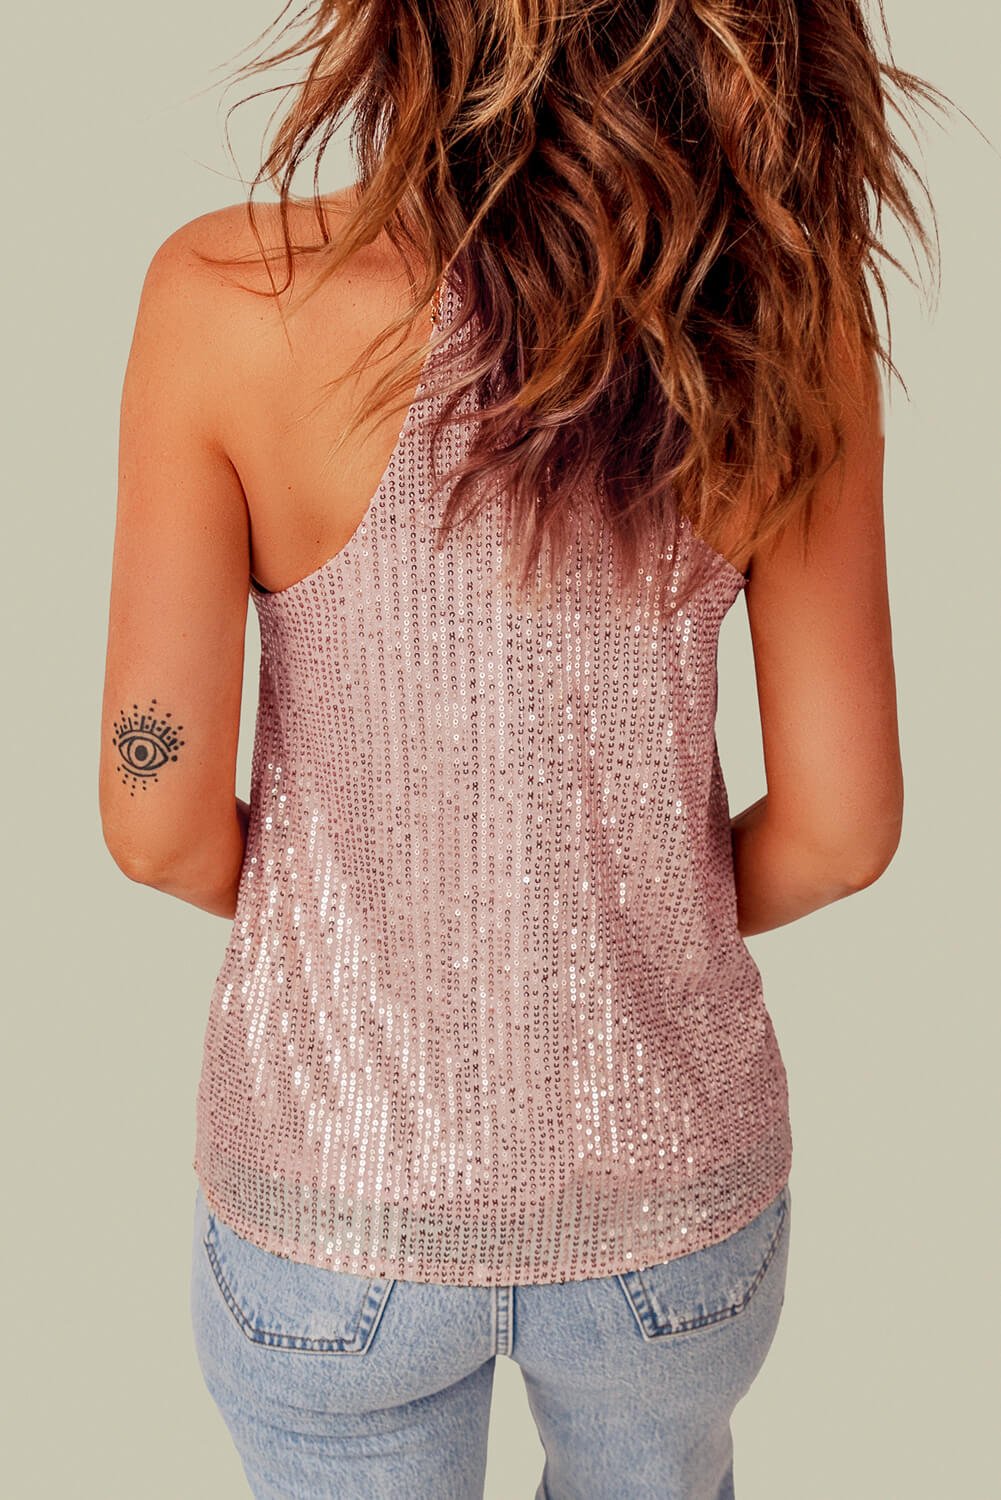 Women’s Sequin Tank Tops - pink sequin tank top with a racerback #Firefly Lane Boutique1